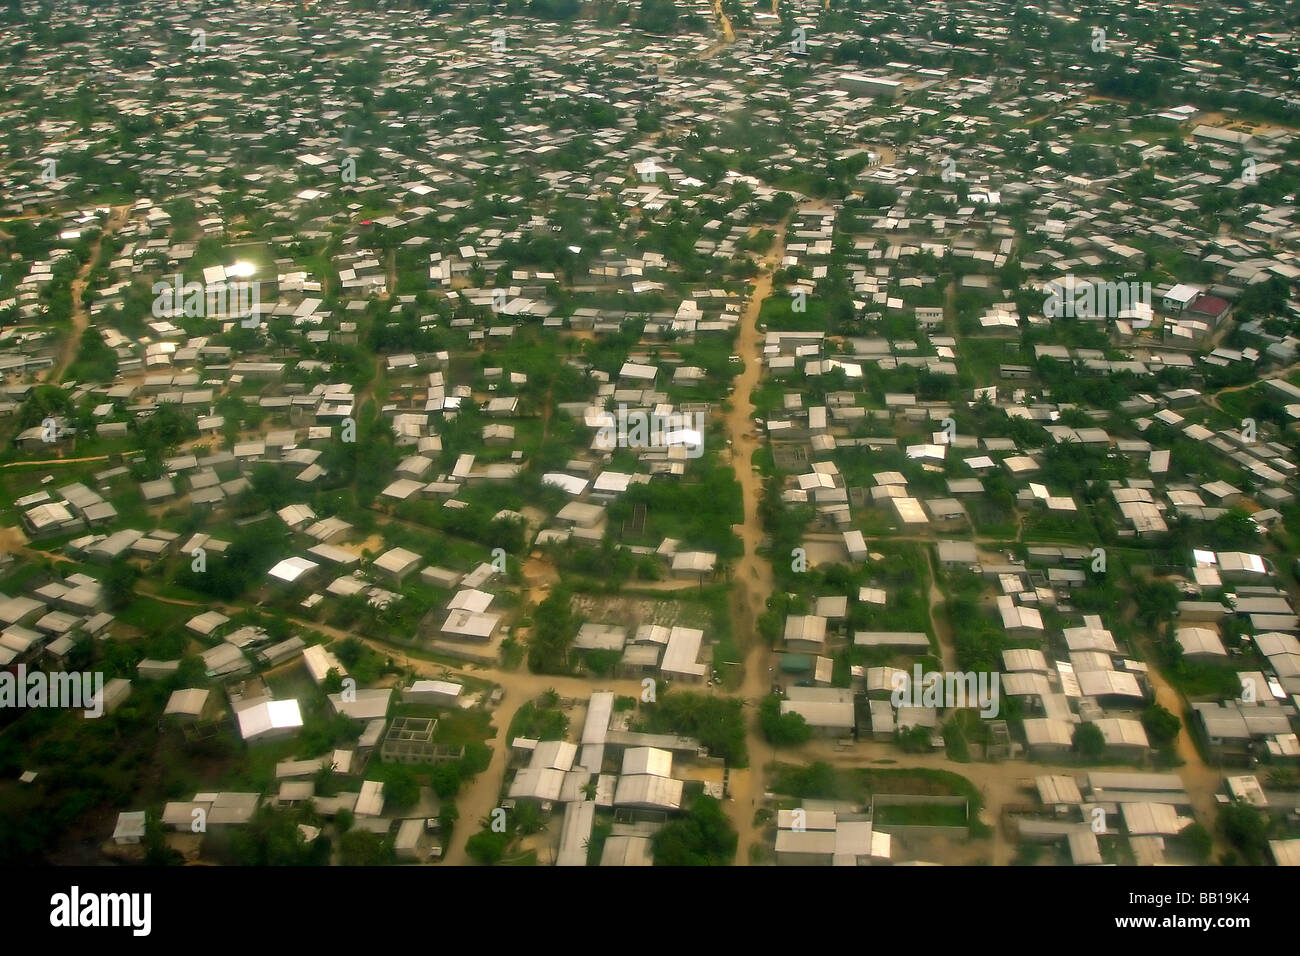 Cameroon, Douala. Overview of the city of Douala, economic capital city of Cameroon (RF) Stock Photo